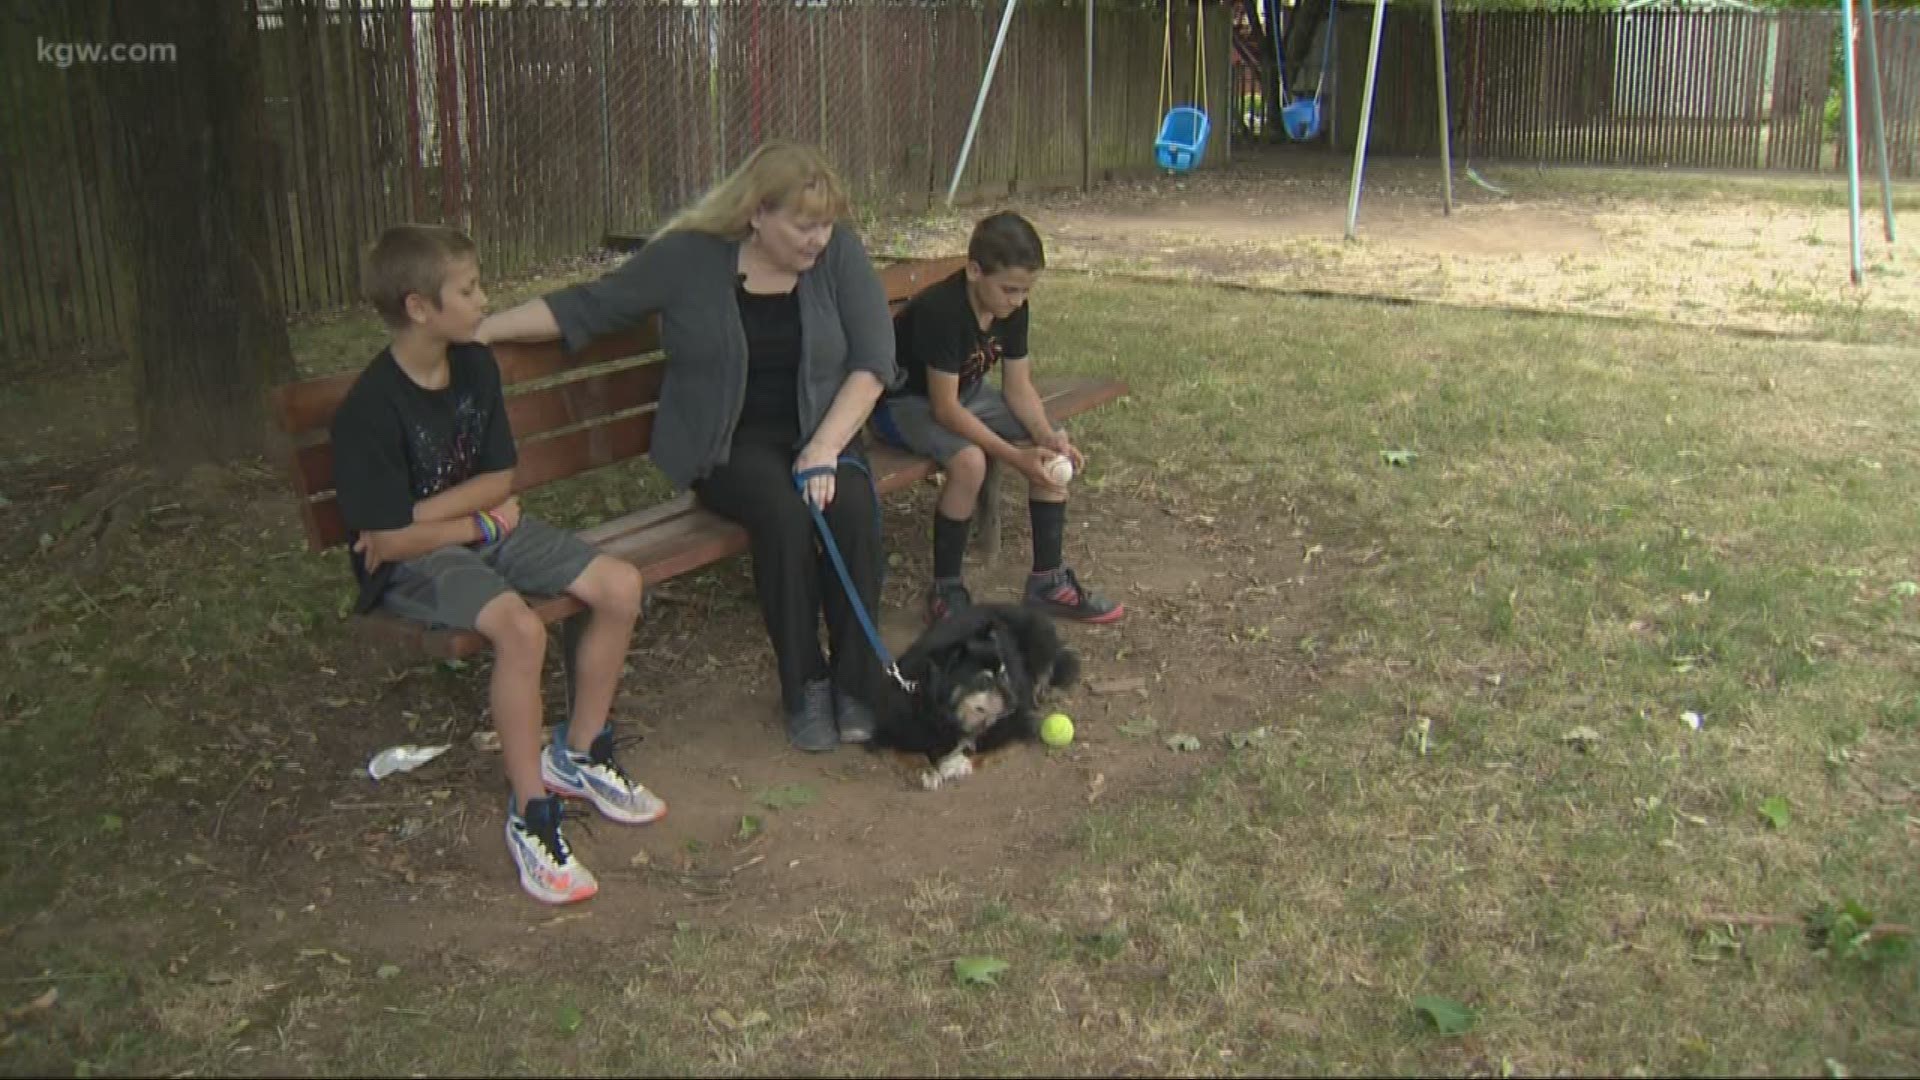 An Australian Shepard mix named Chase, who became stranded on a steep hillside in Canby for about a week before he was rescued Monday, is now back with his relieved owner.